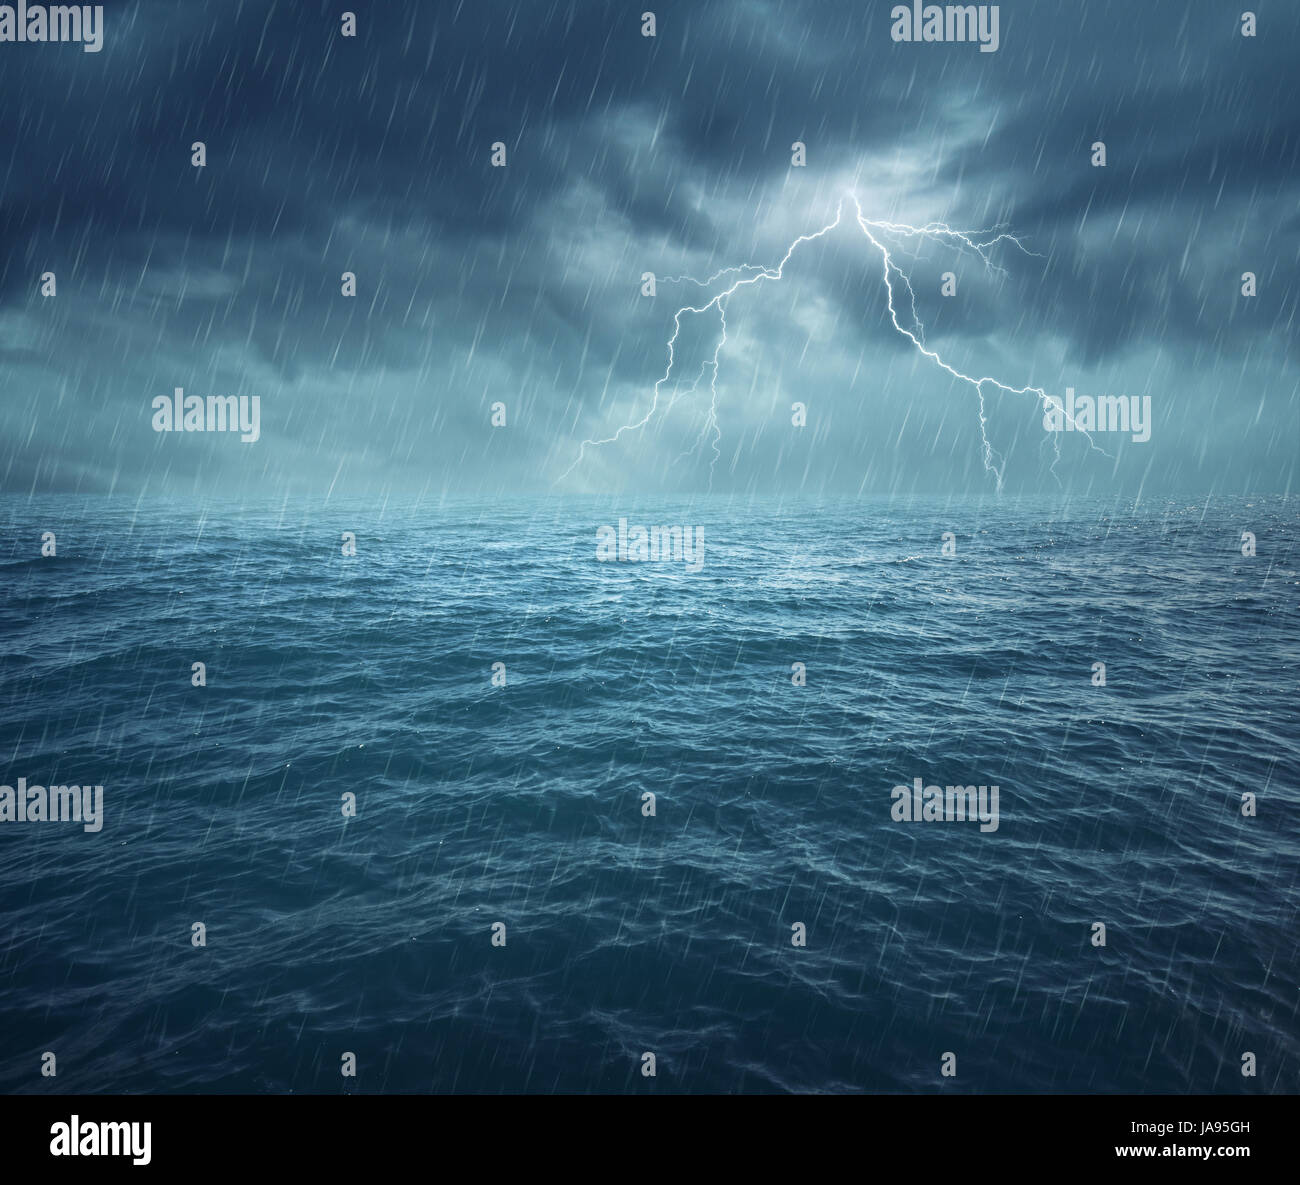 Image of night stormy sea with big waves and lightning Stock Photo